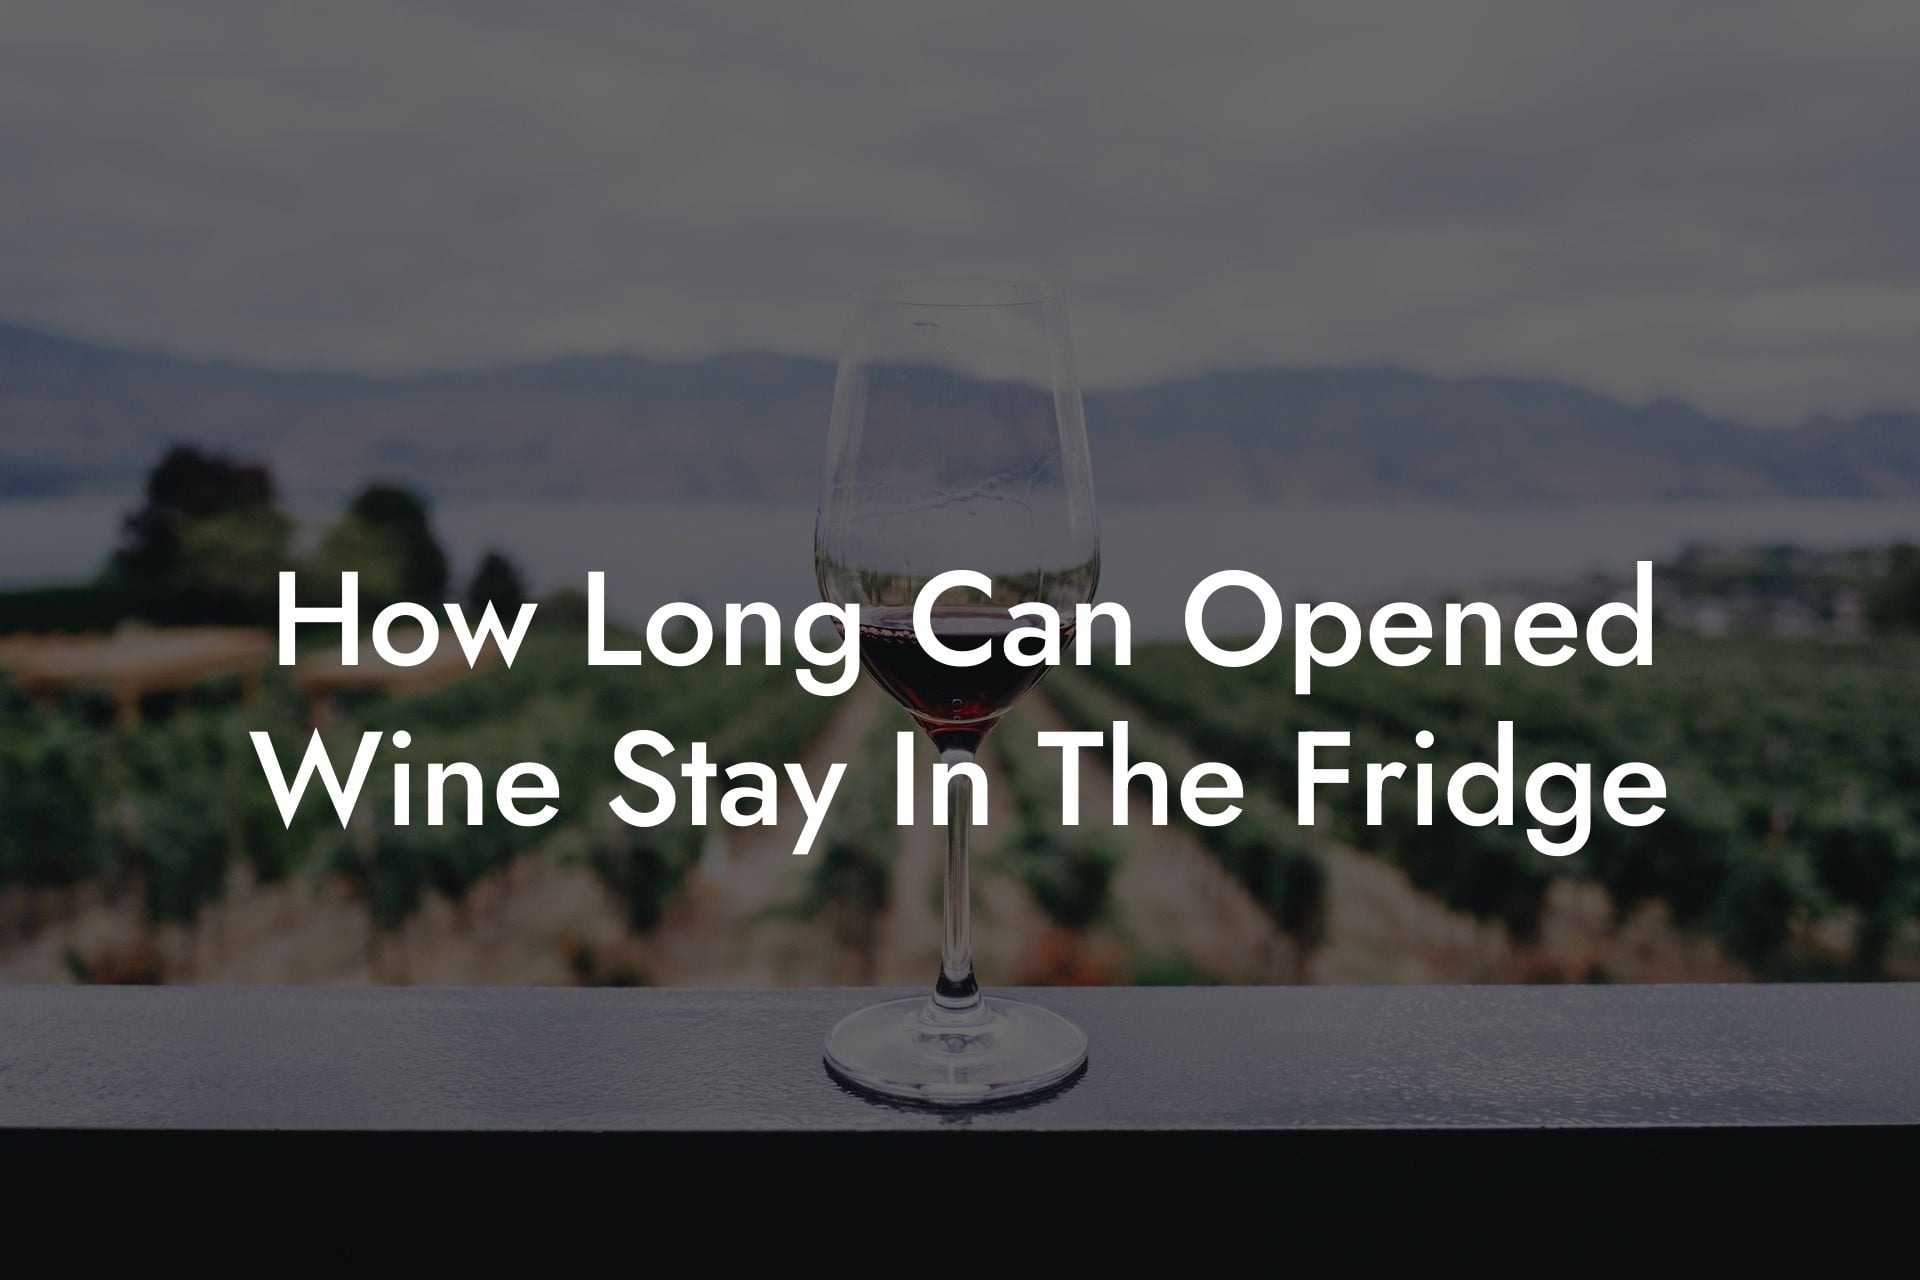 How Long Can Opened Wine Stay In The Fridge